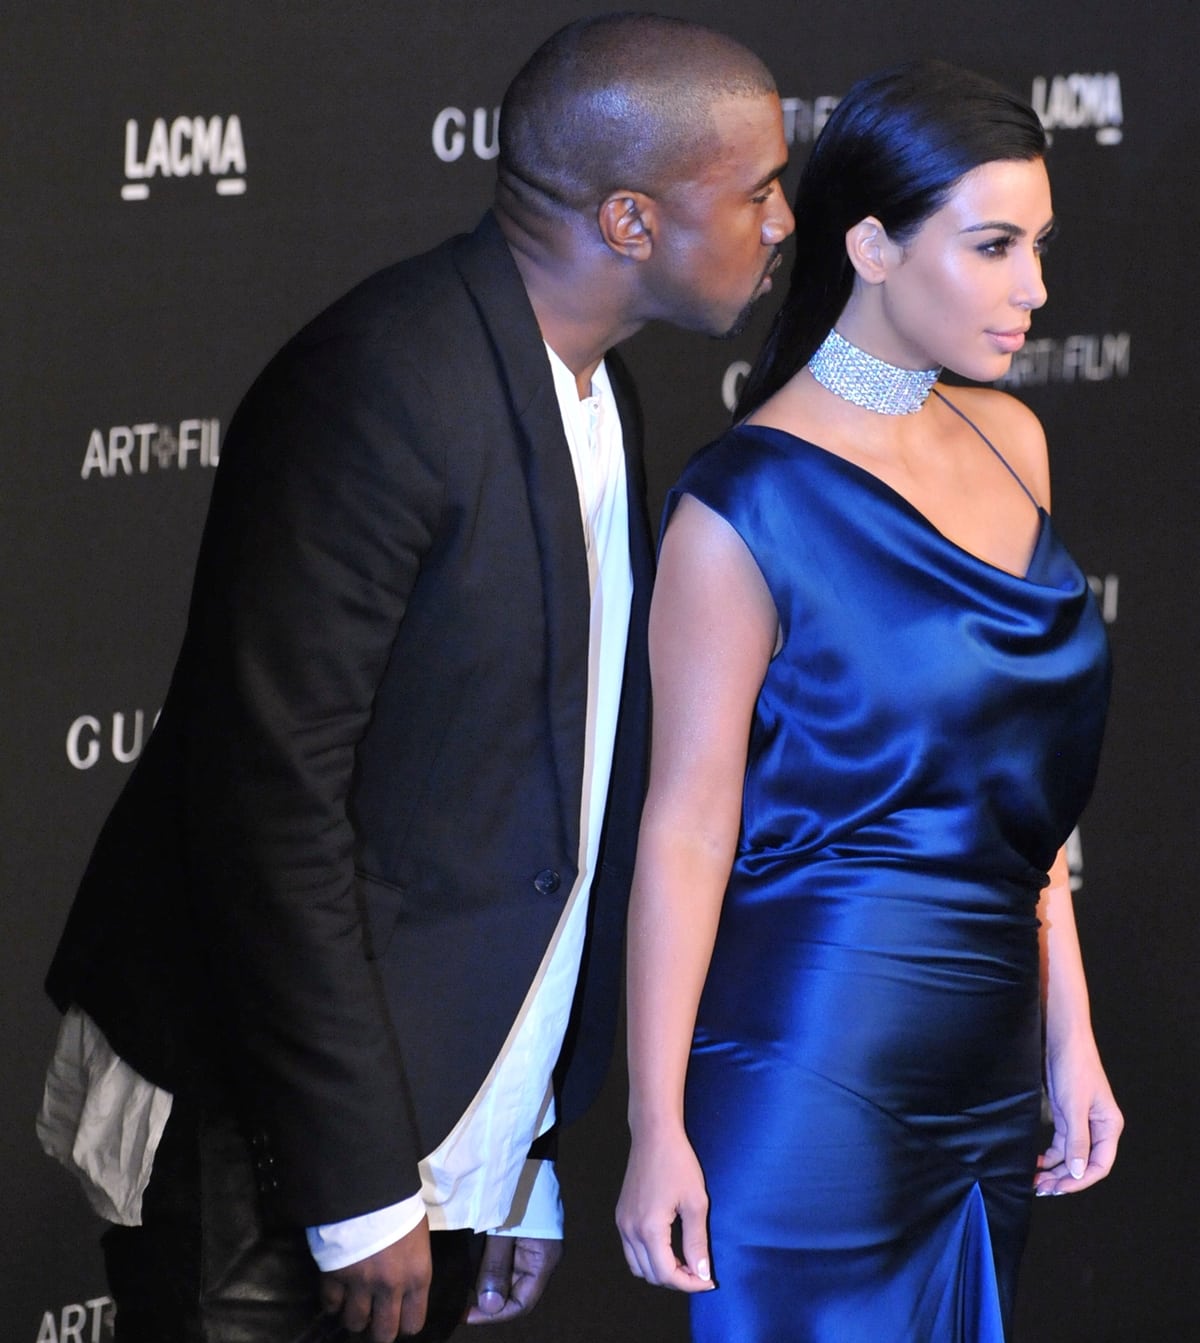 Kim Kardashian explained why she's “taking the high road” when it comes to her relationship with Kanye West